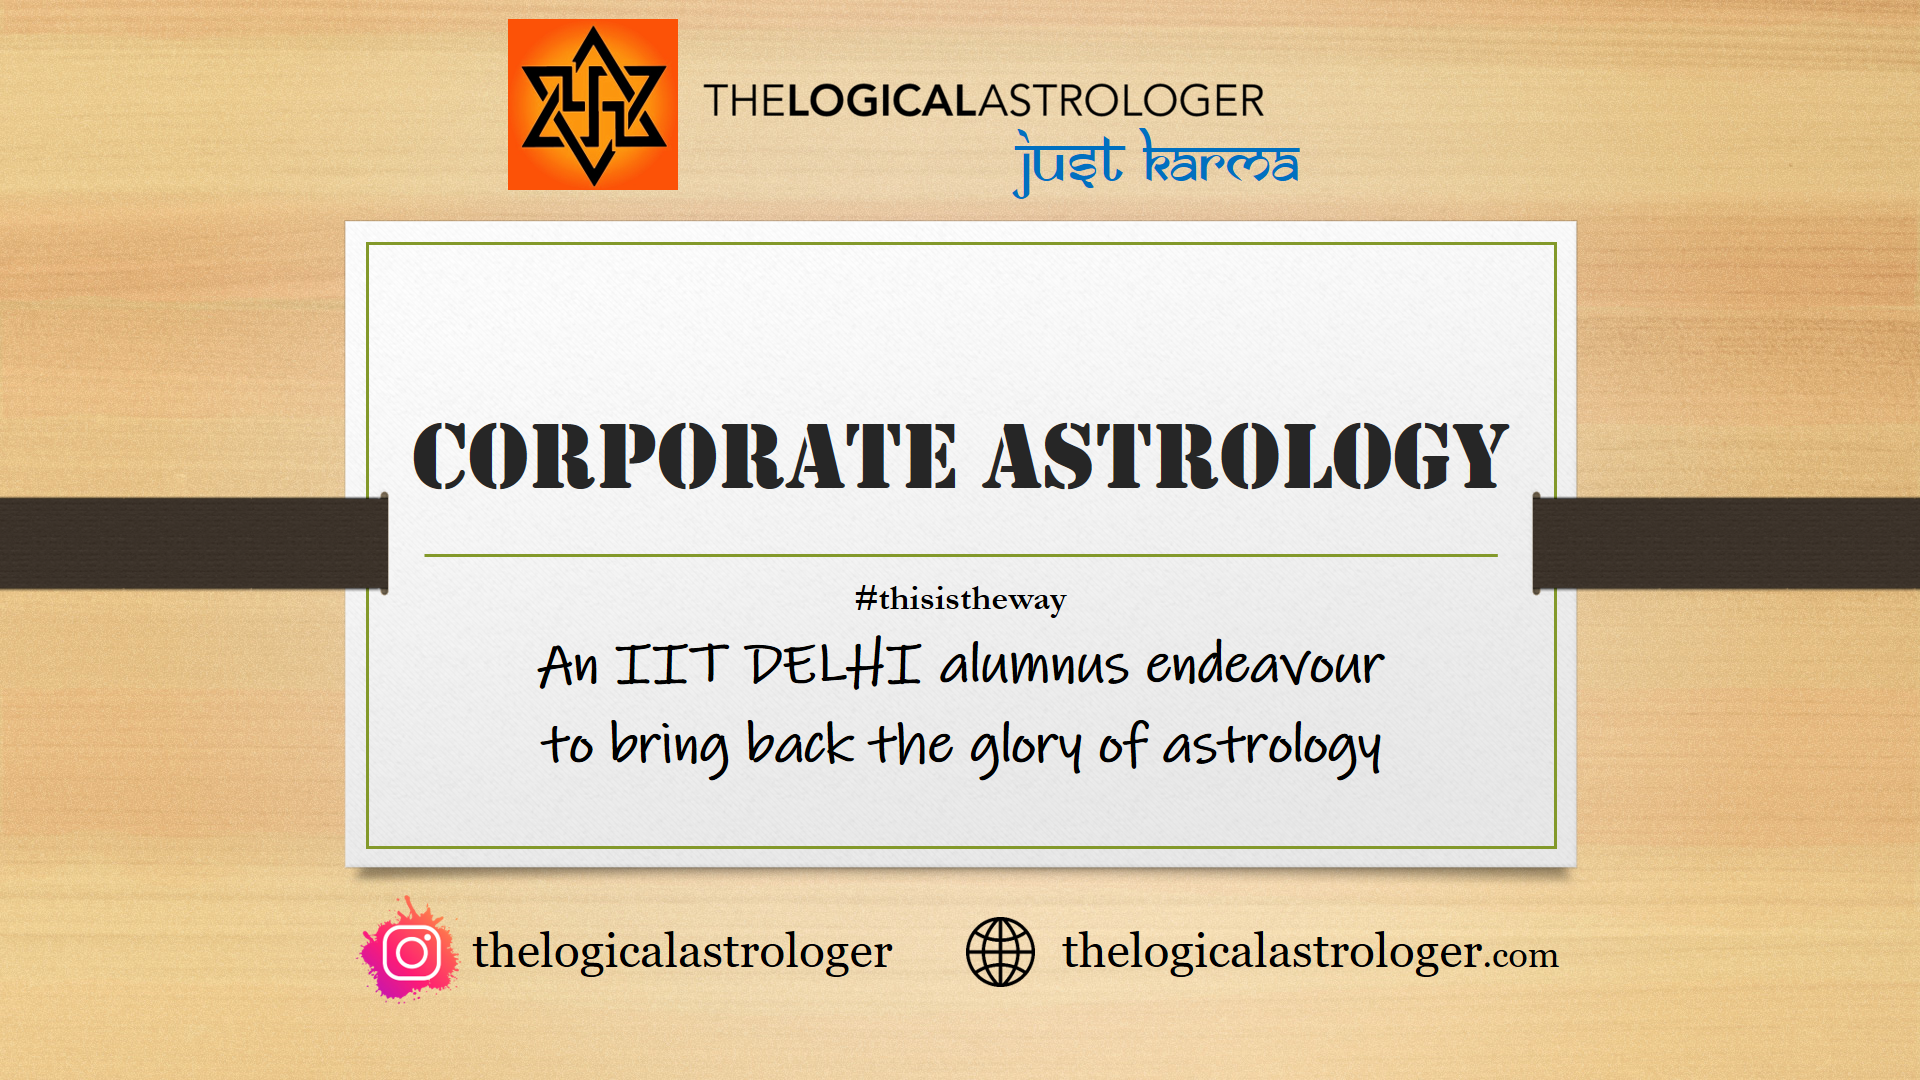 THE LOGICAL ASTROLOGER CORPORATE ASTROLOGY